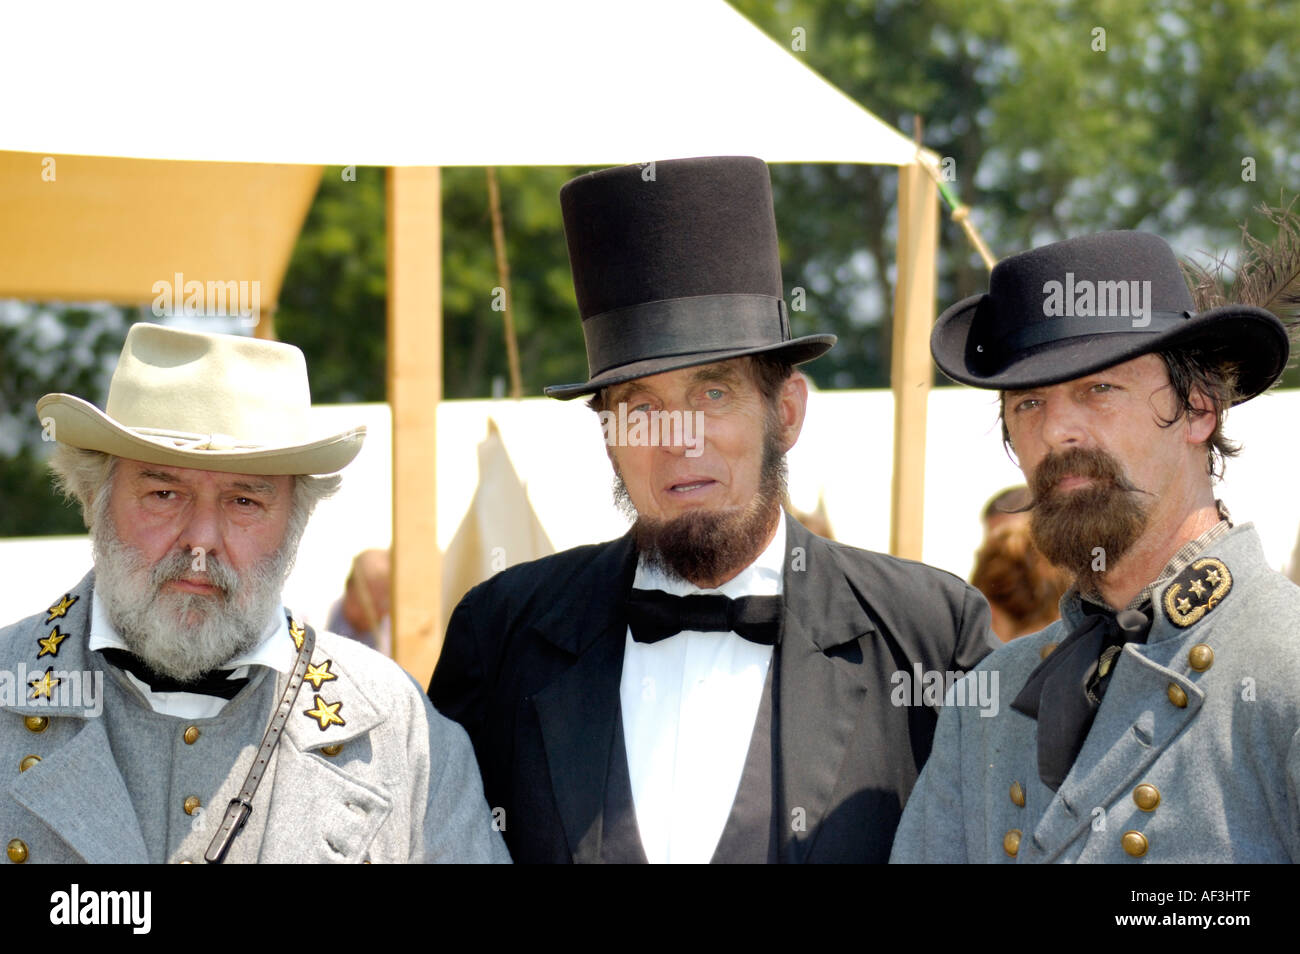 Confederate generals John Hunt Morgan and Robert E Lee with Union President Abraham Lincoln at an American Civil War reenactment Stock Photo